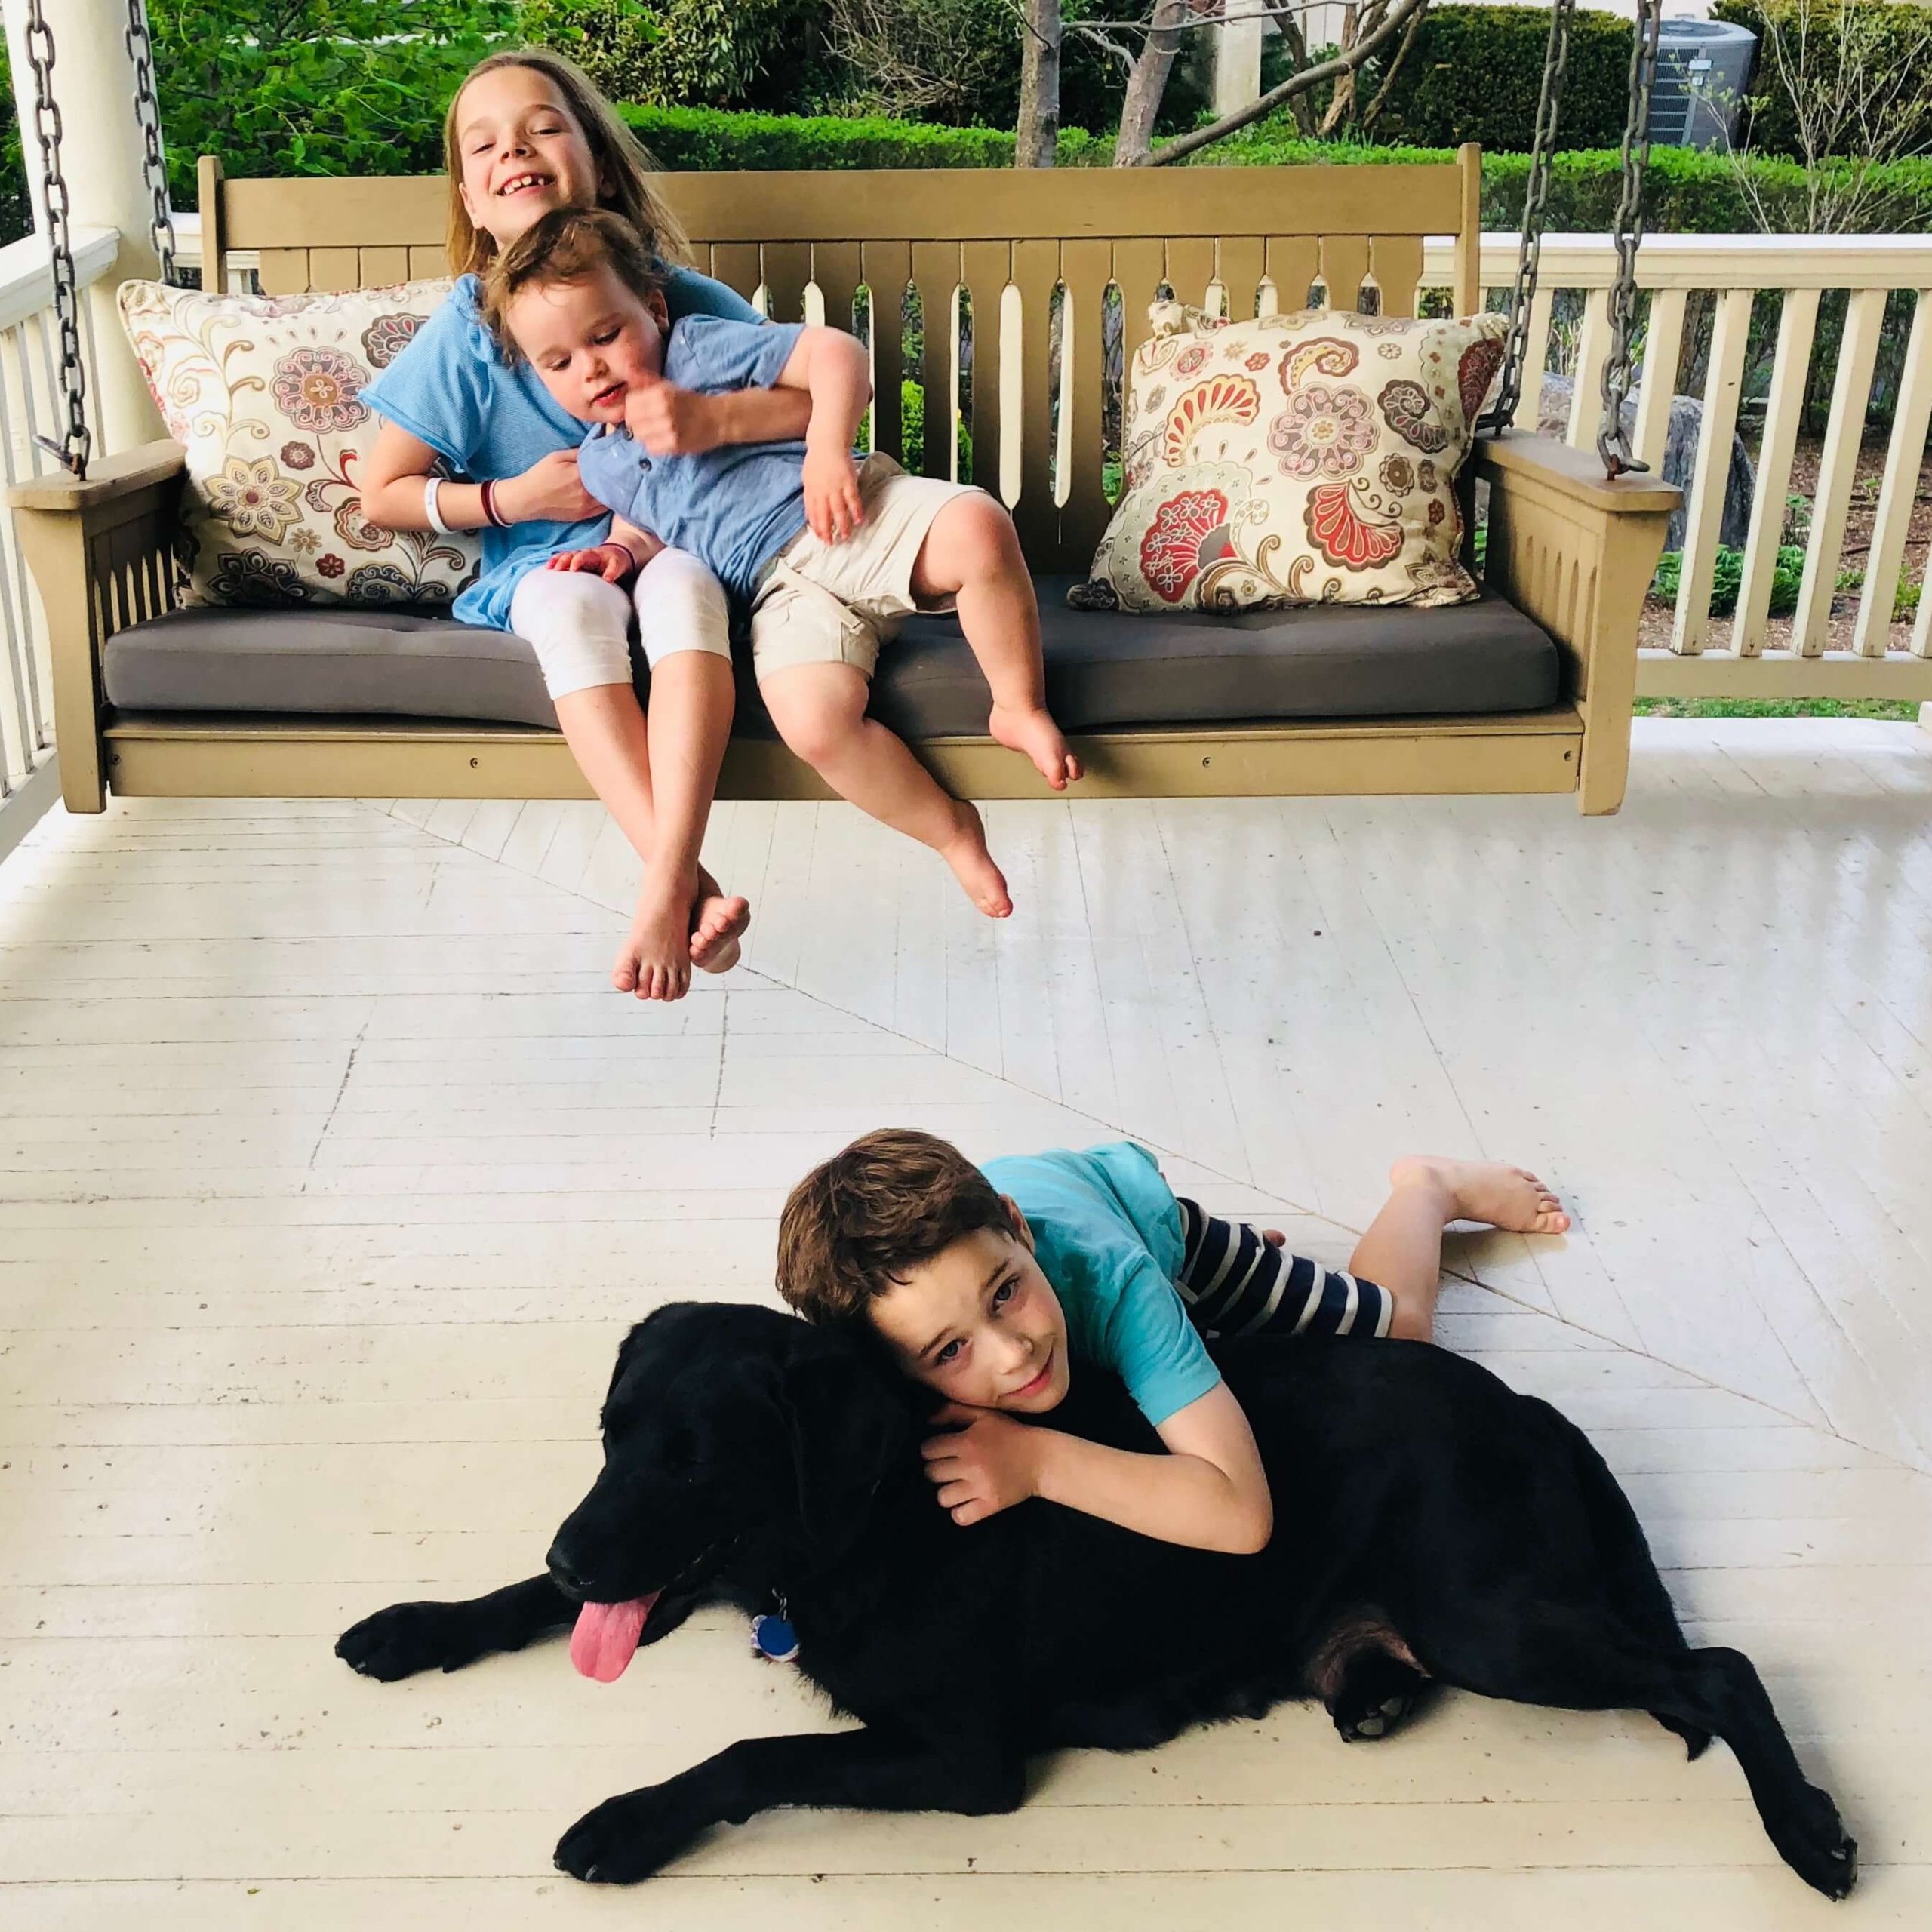 Guiding Eyes brood Haven relaxes on a porch with the Mingey children